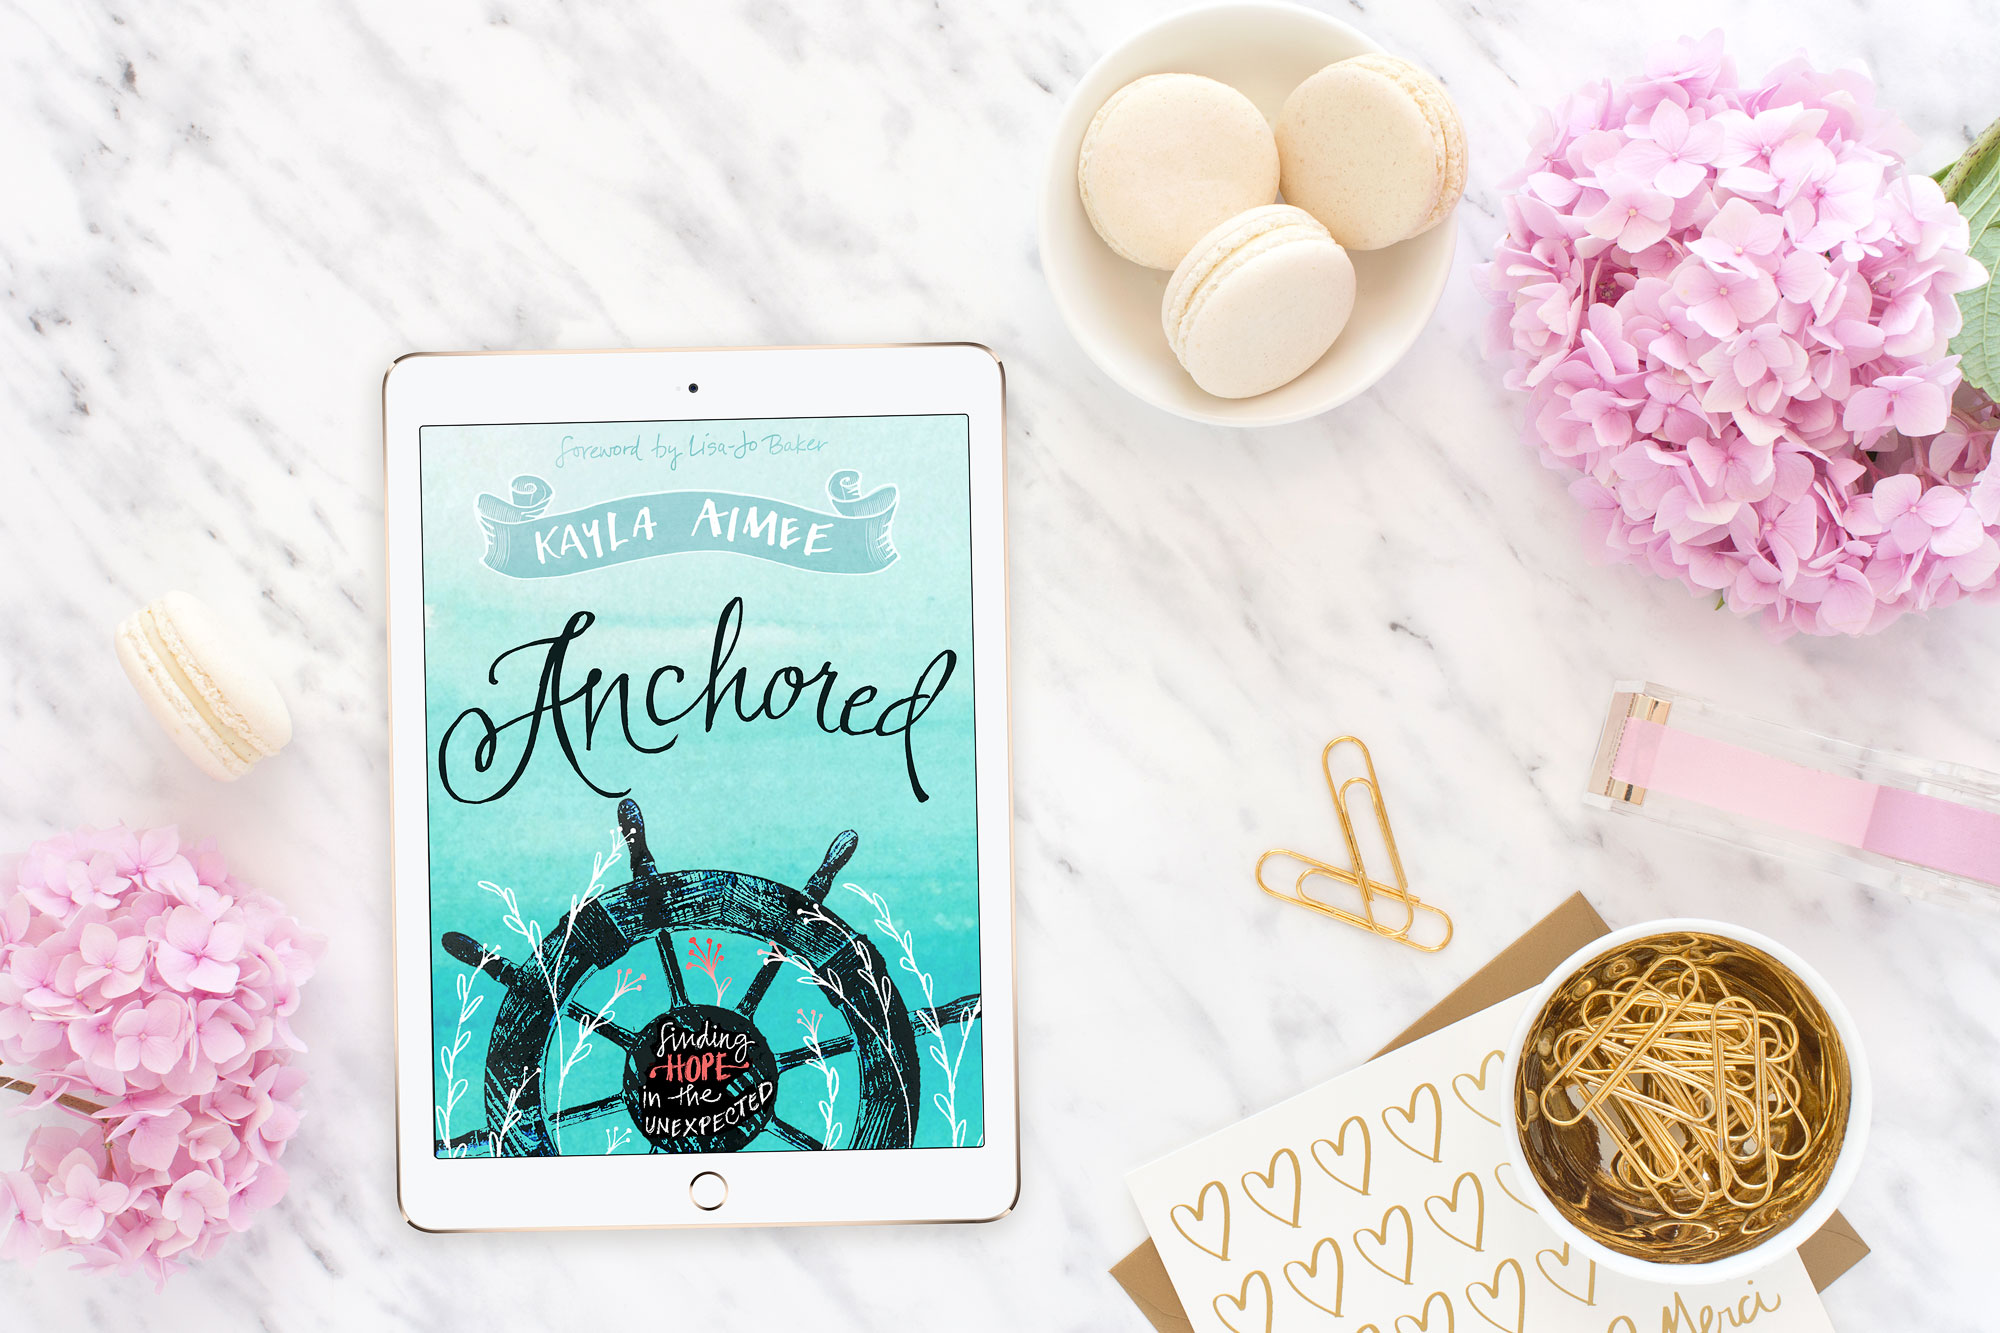 Anchored: Finding Hope in the Unexpected by Kayla Aimee